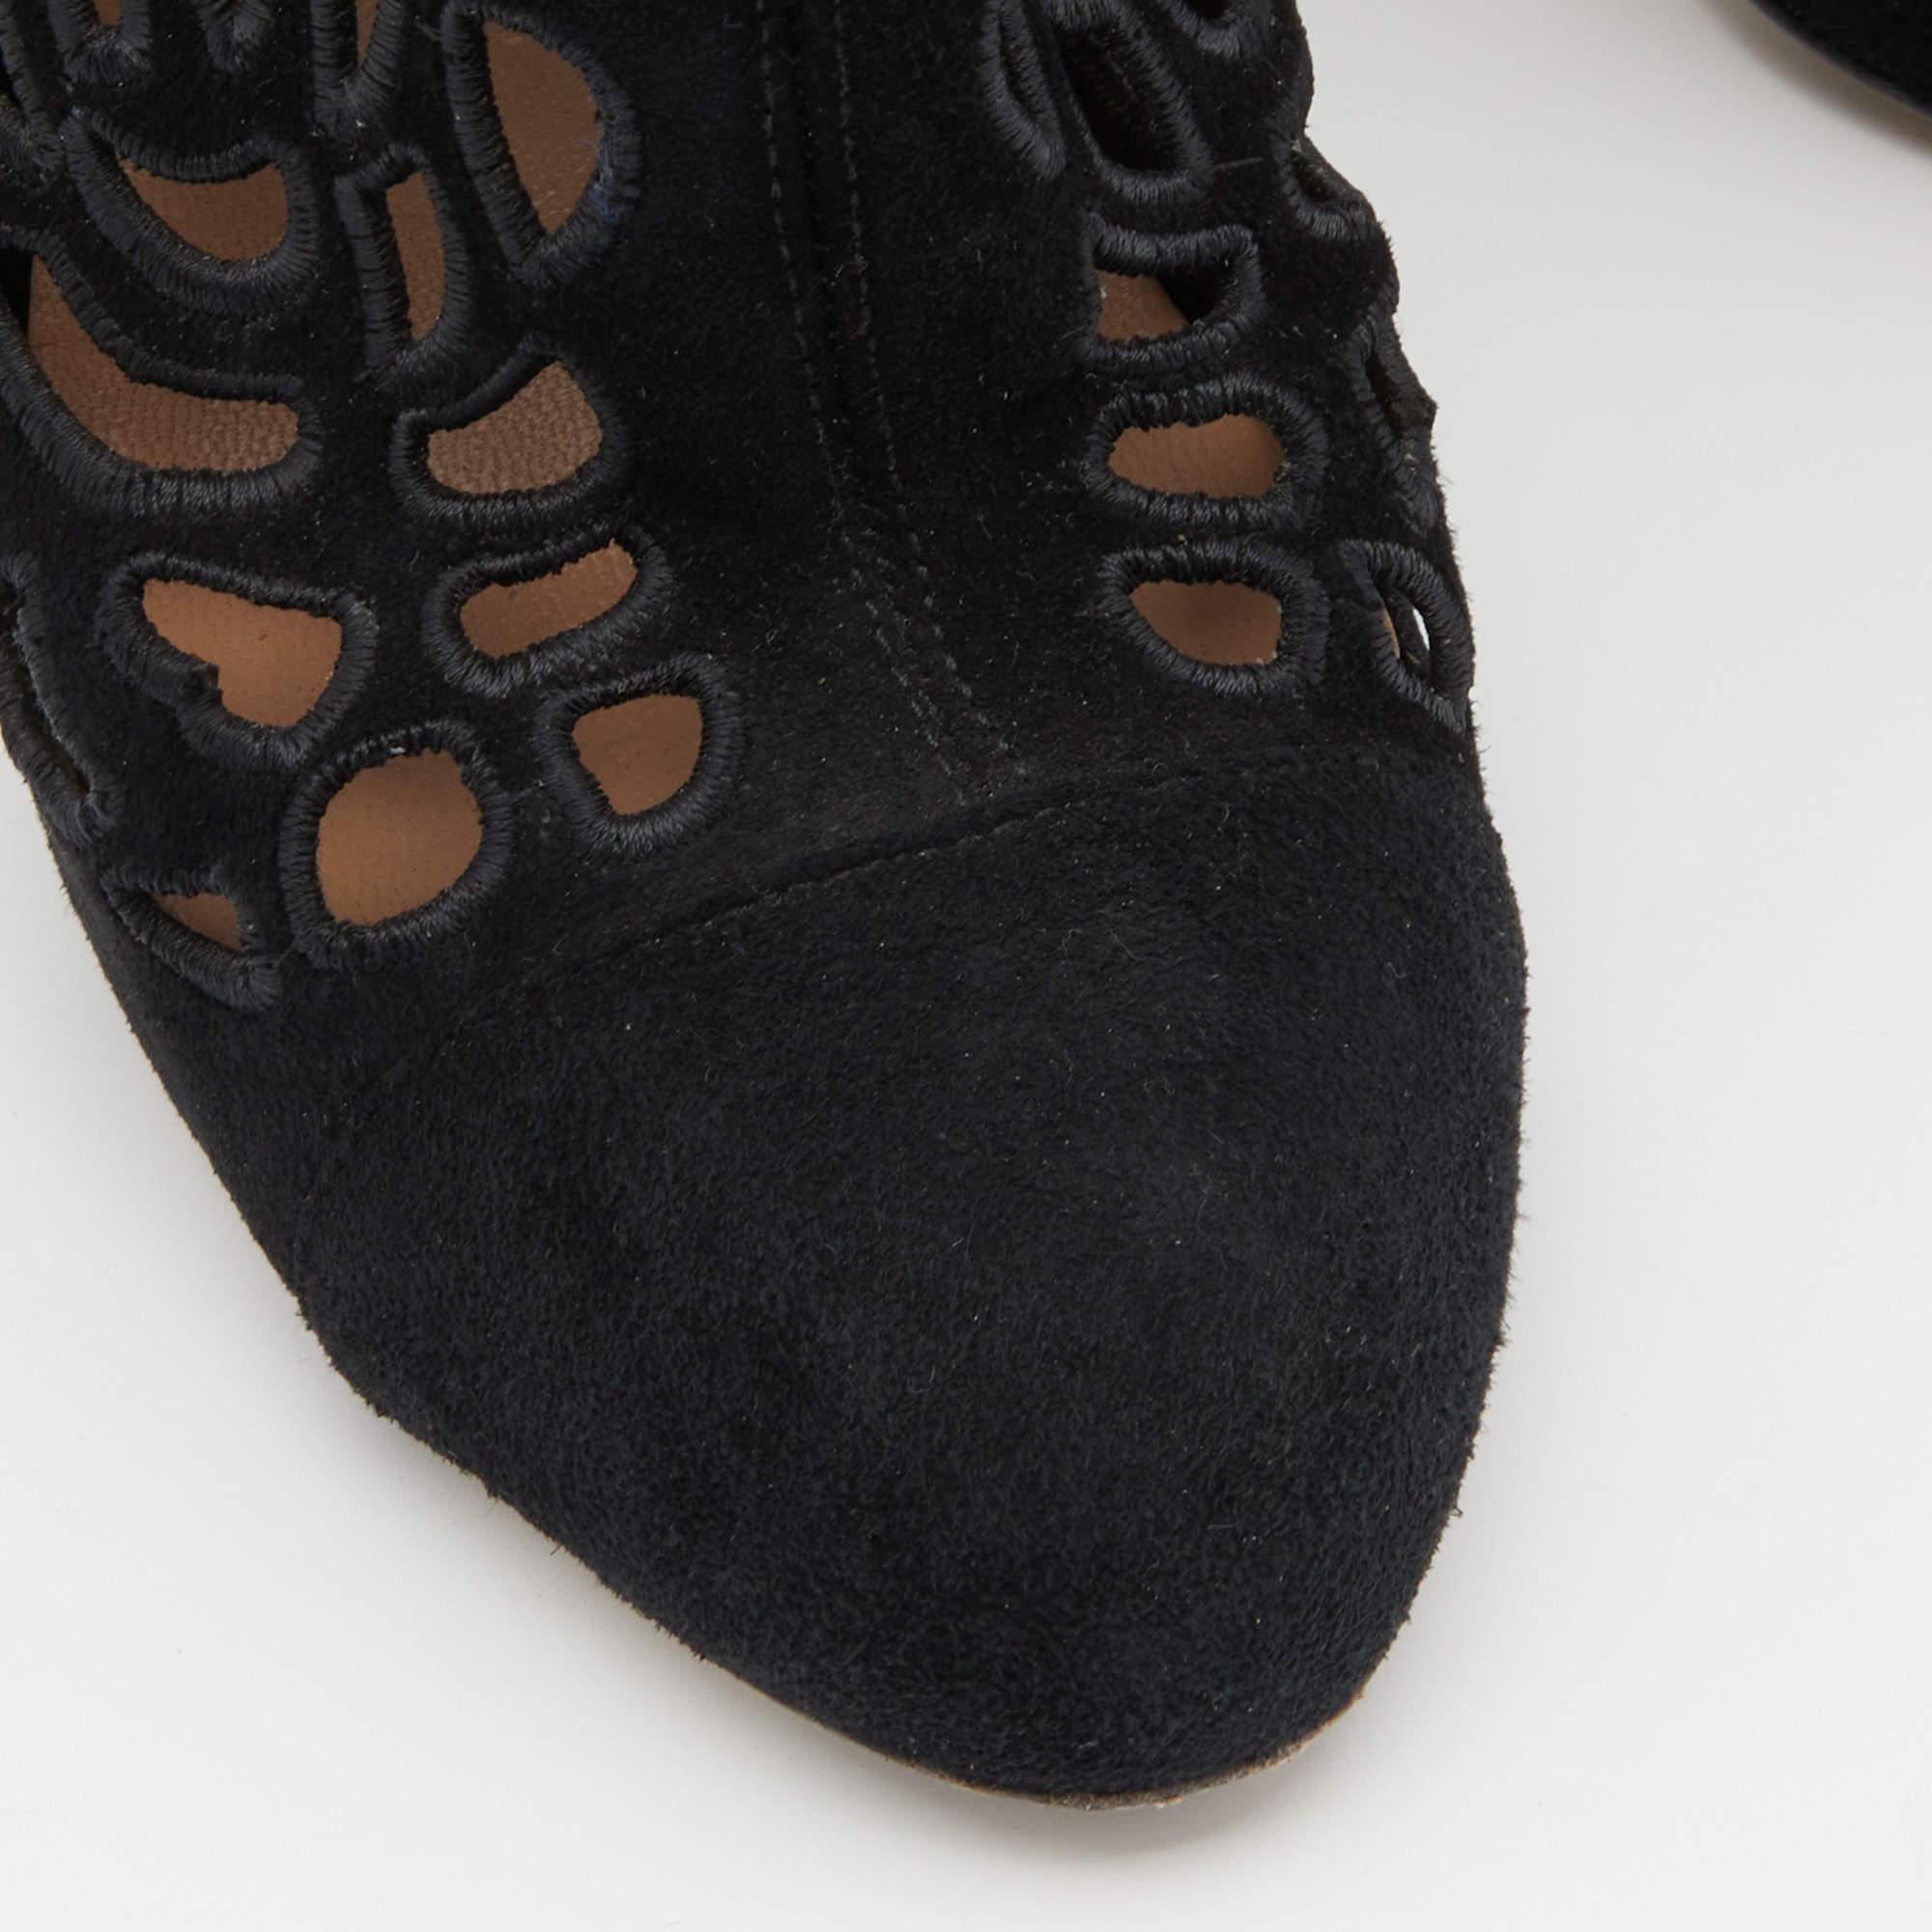 Valentino Black Laser Cut Suede Ankle Length Boots Size 38 For Sale 3